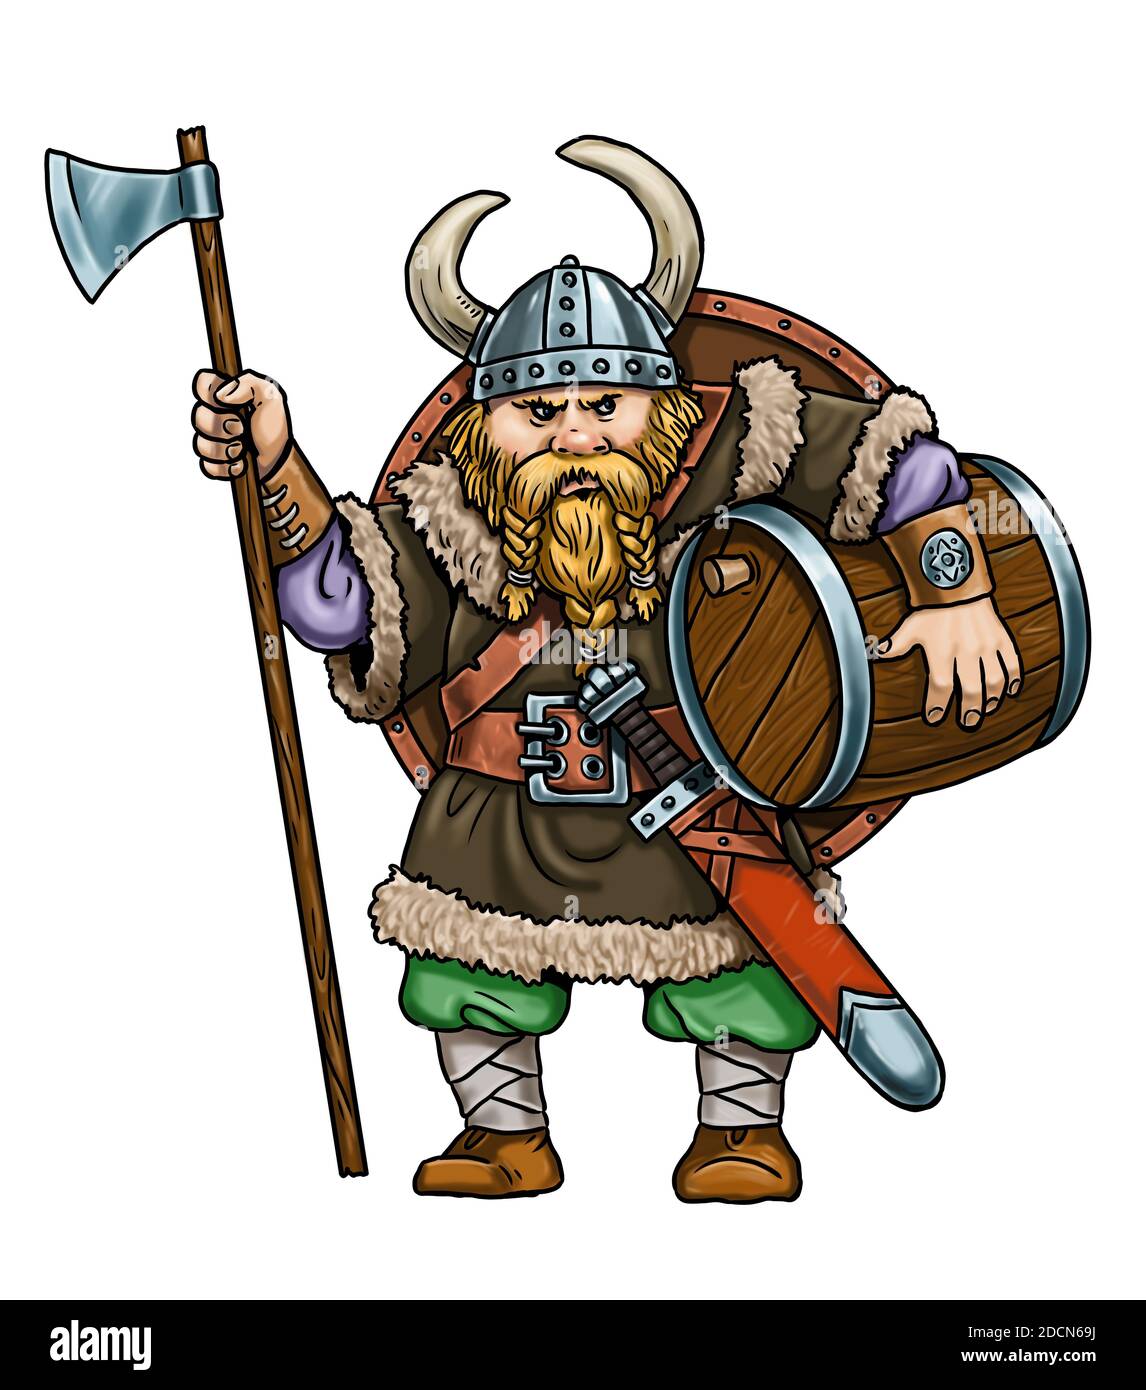 Viking with ax. Medieval robber. Comic drawing. Stock Photo